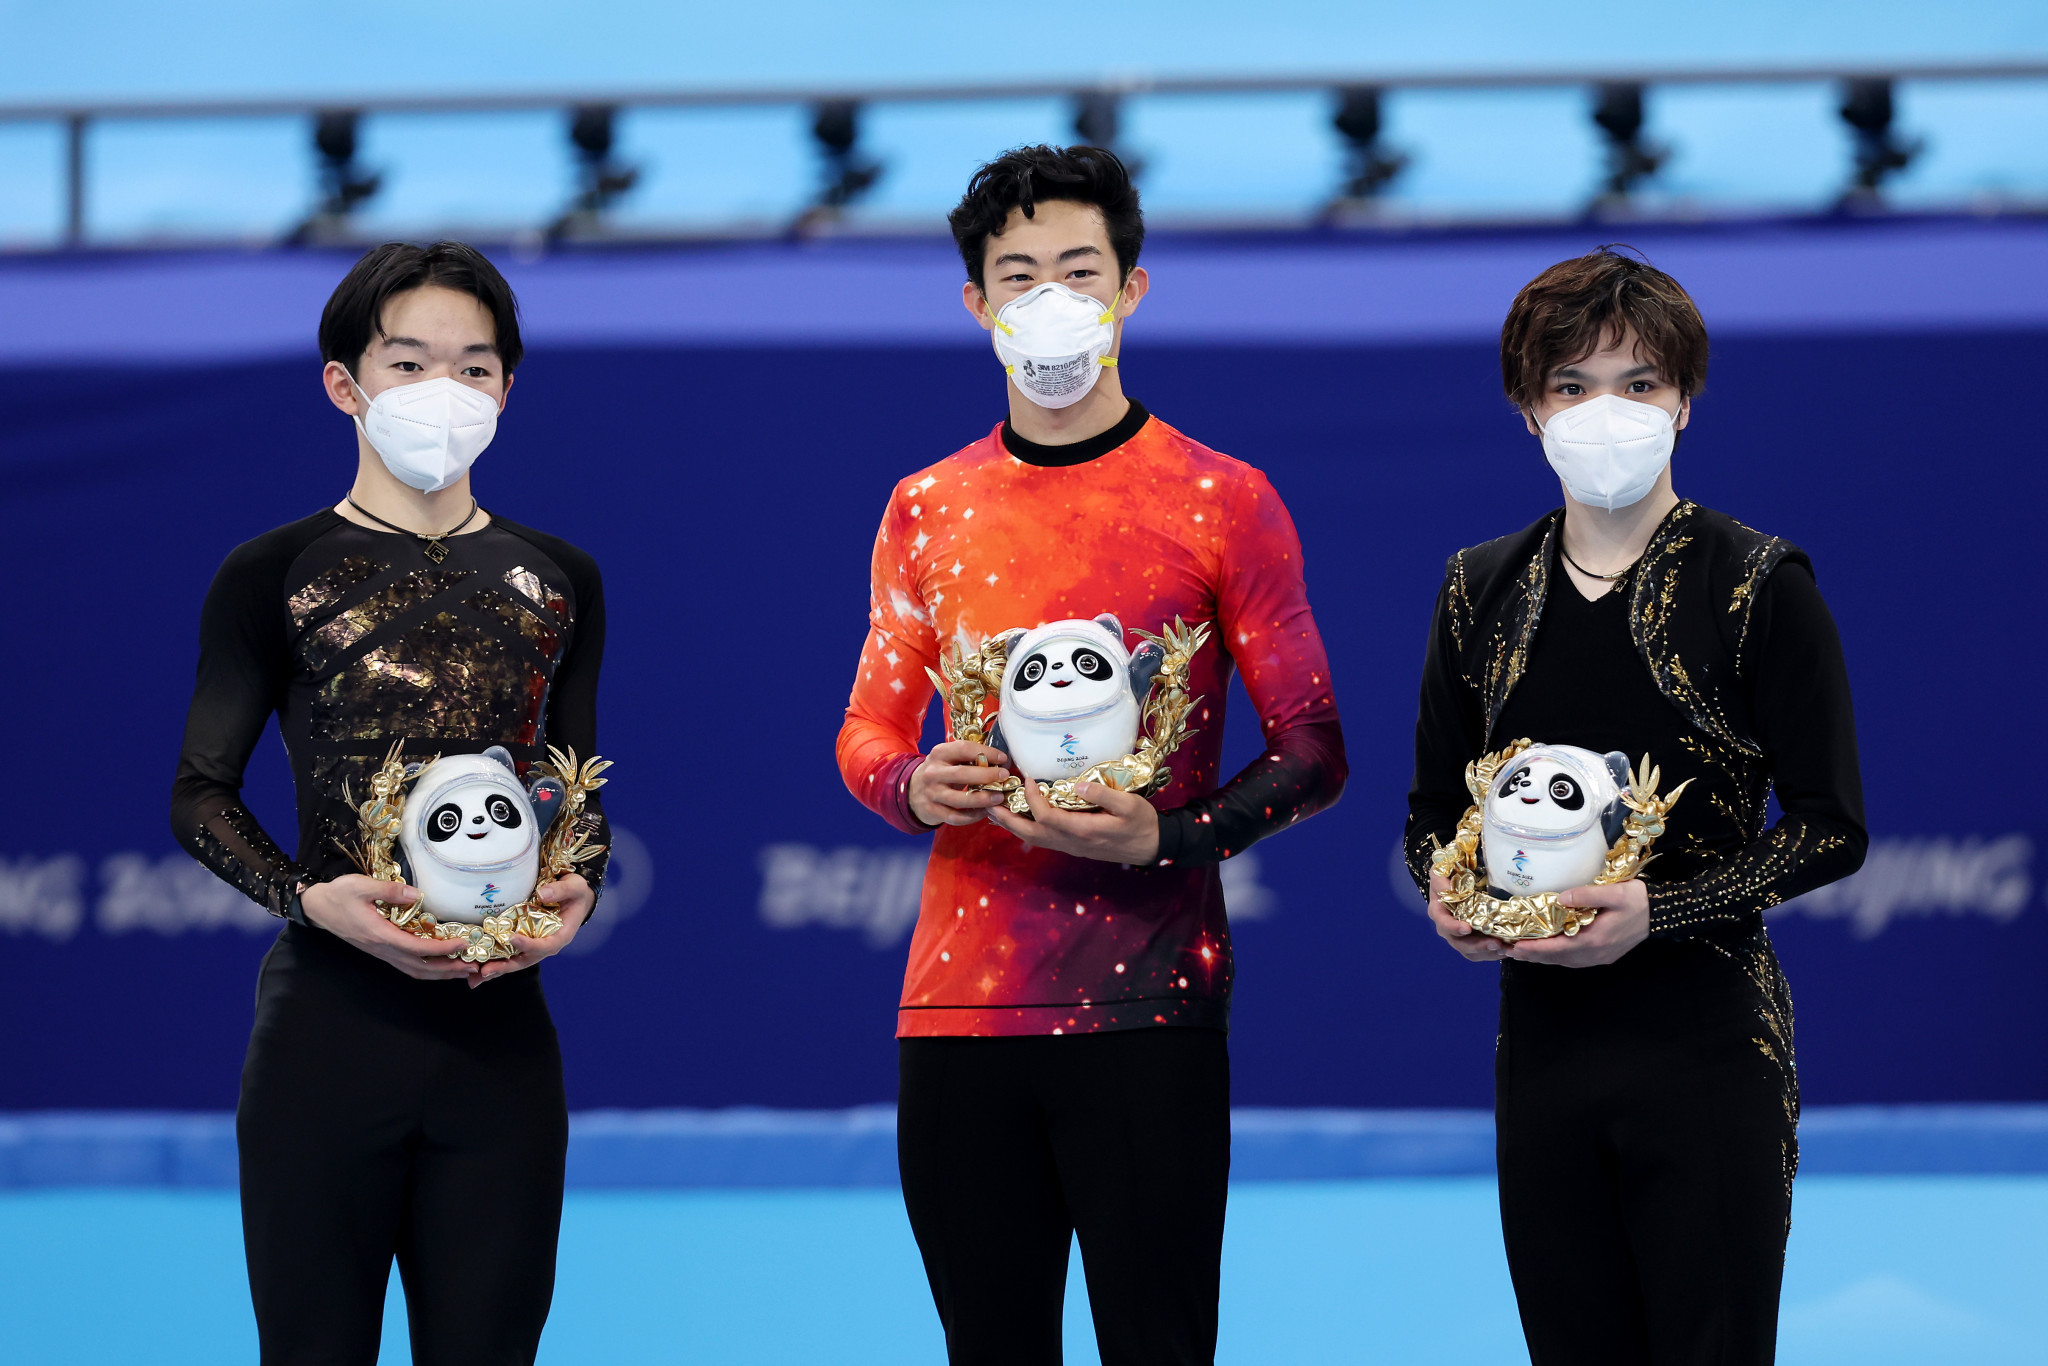 Shoma Uno, right, is the only men's medallist from Beijing 2022 due to be in Grand Prix action this season ©Getty Images